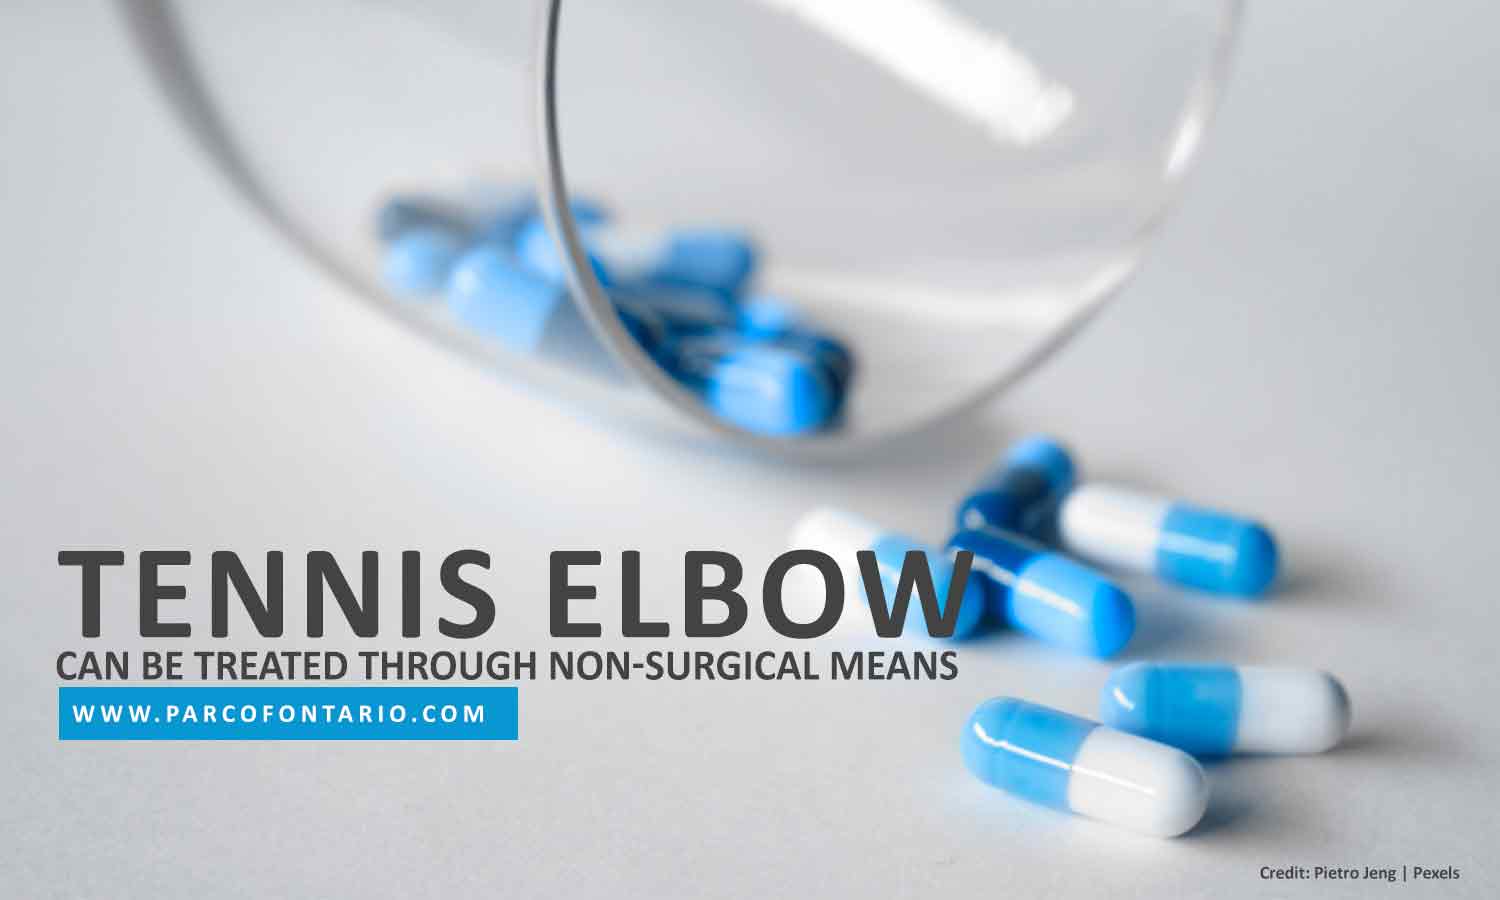 Tennis elbow can be treated